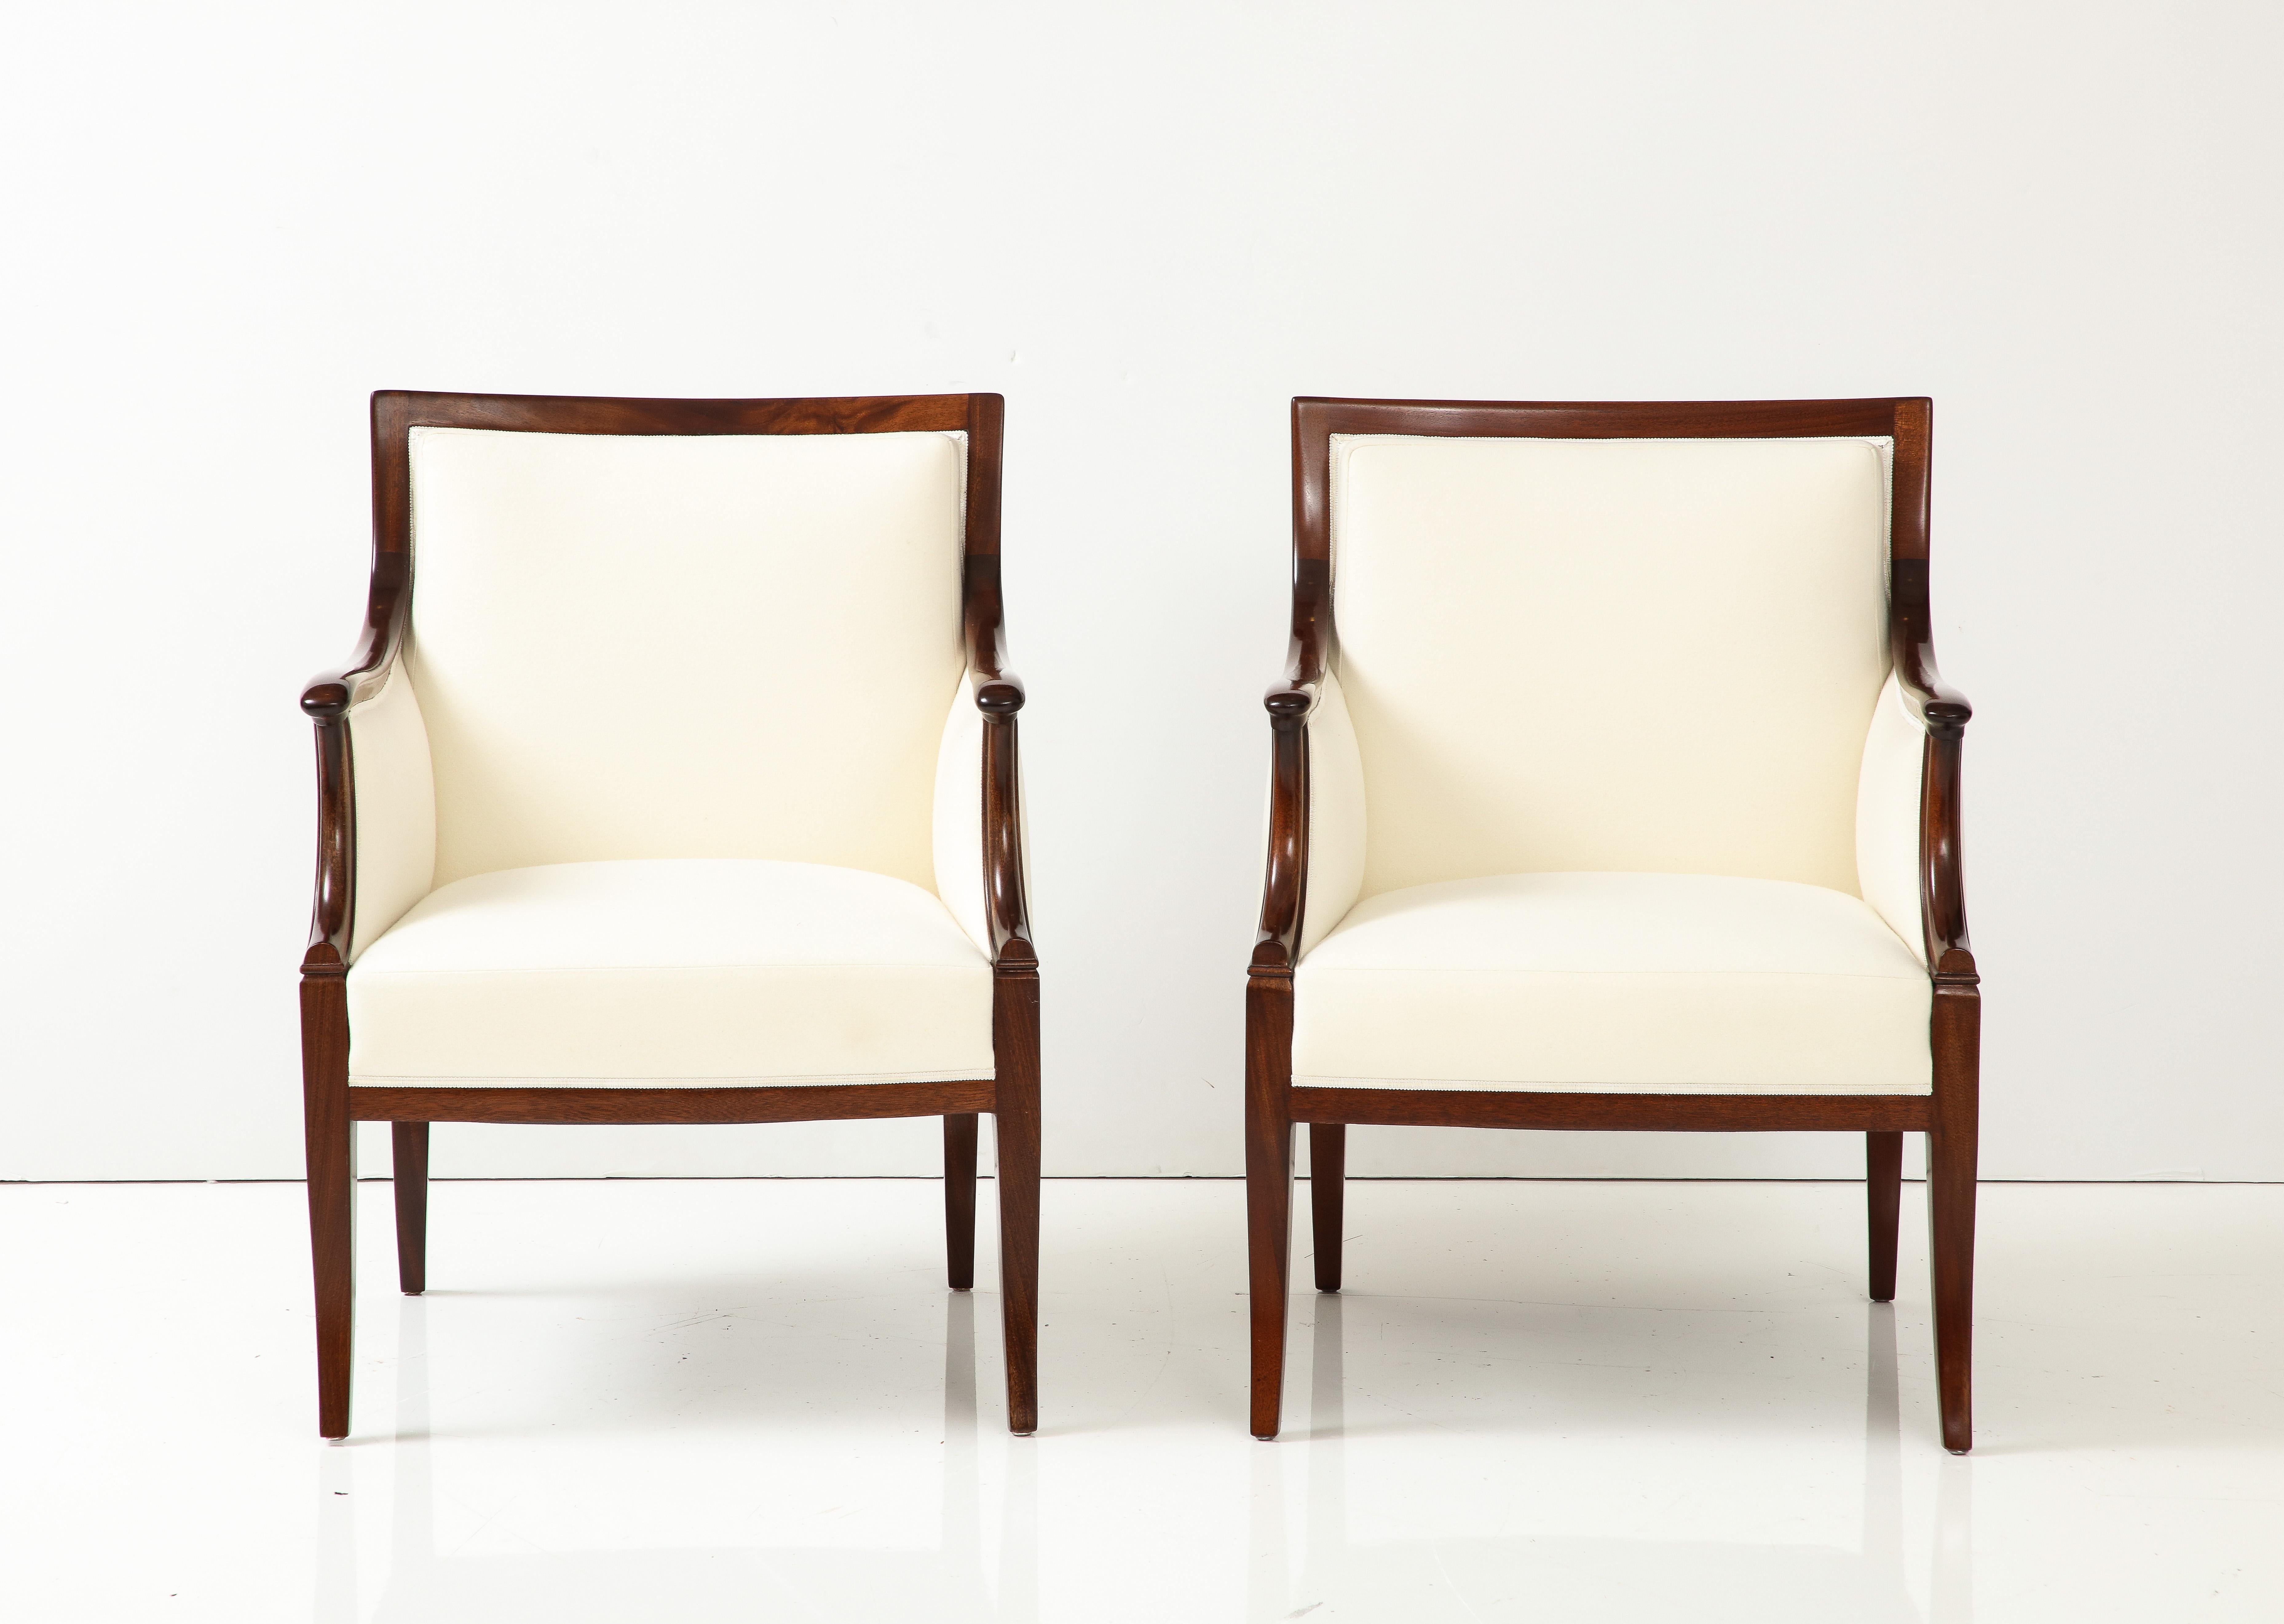 Pair of Danish rich mahogany armchairs by Frits Henningsen, circa 1940, with a slightly curved rectangular backrest, downswept armrests on scrolled supports raised on sabre legs. Fully restored and re-French polished. New wool upholstery.